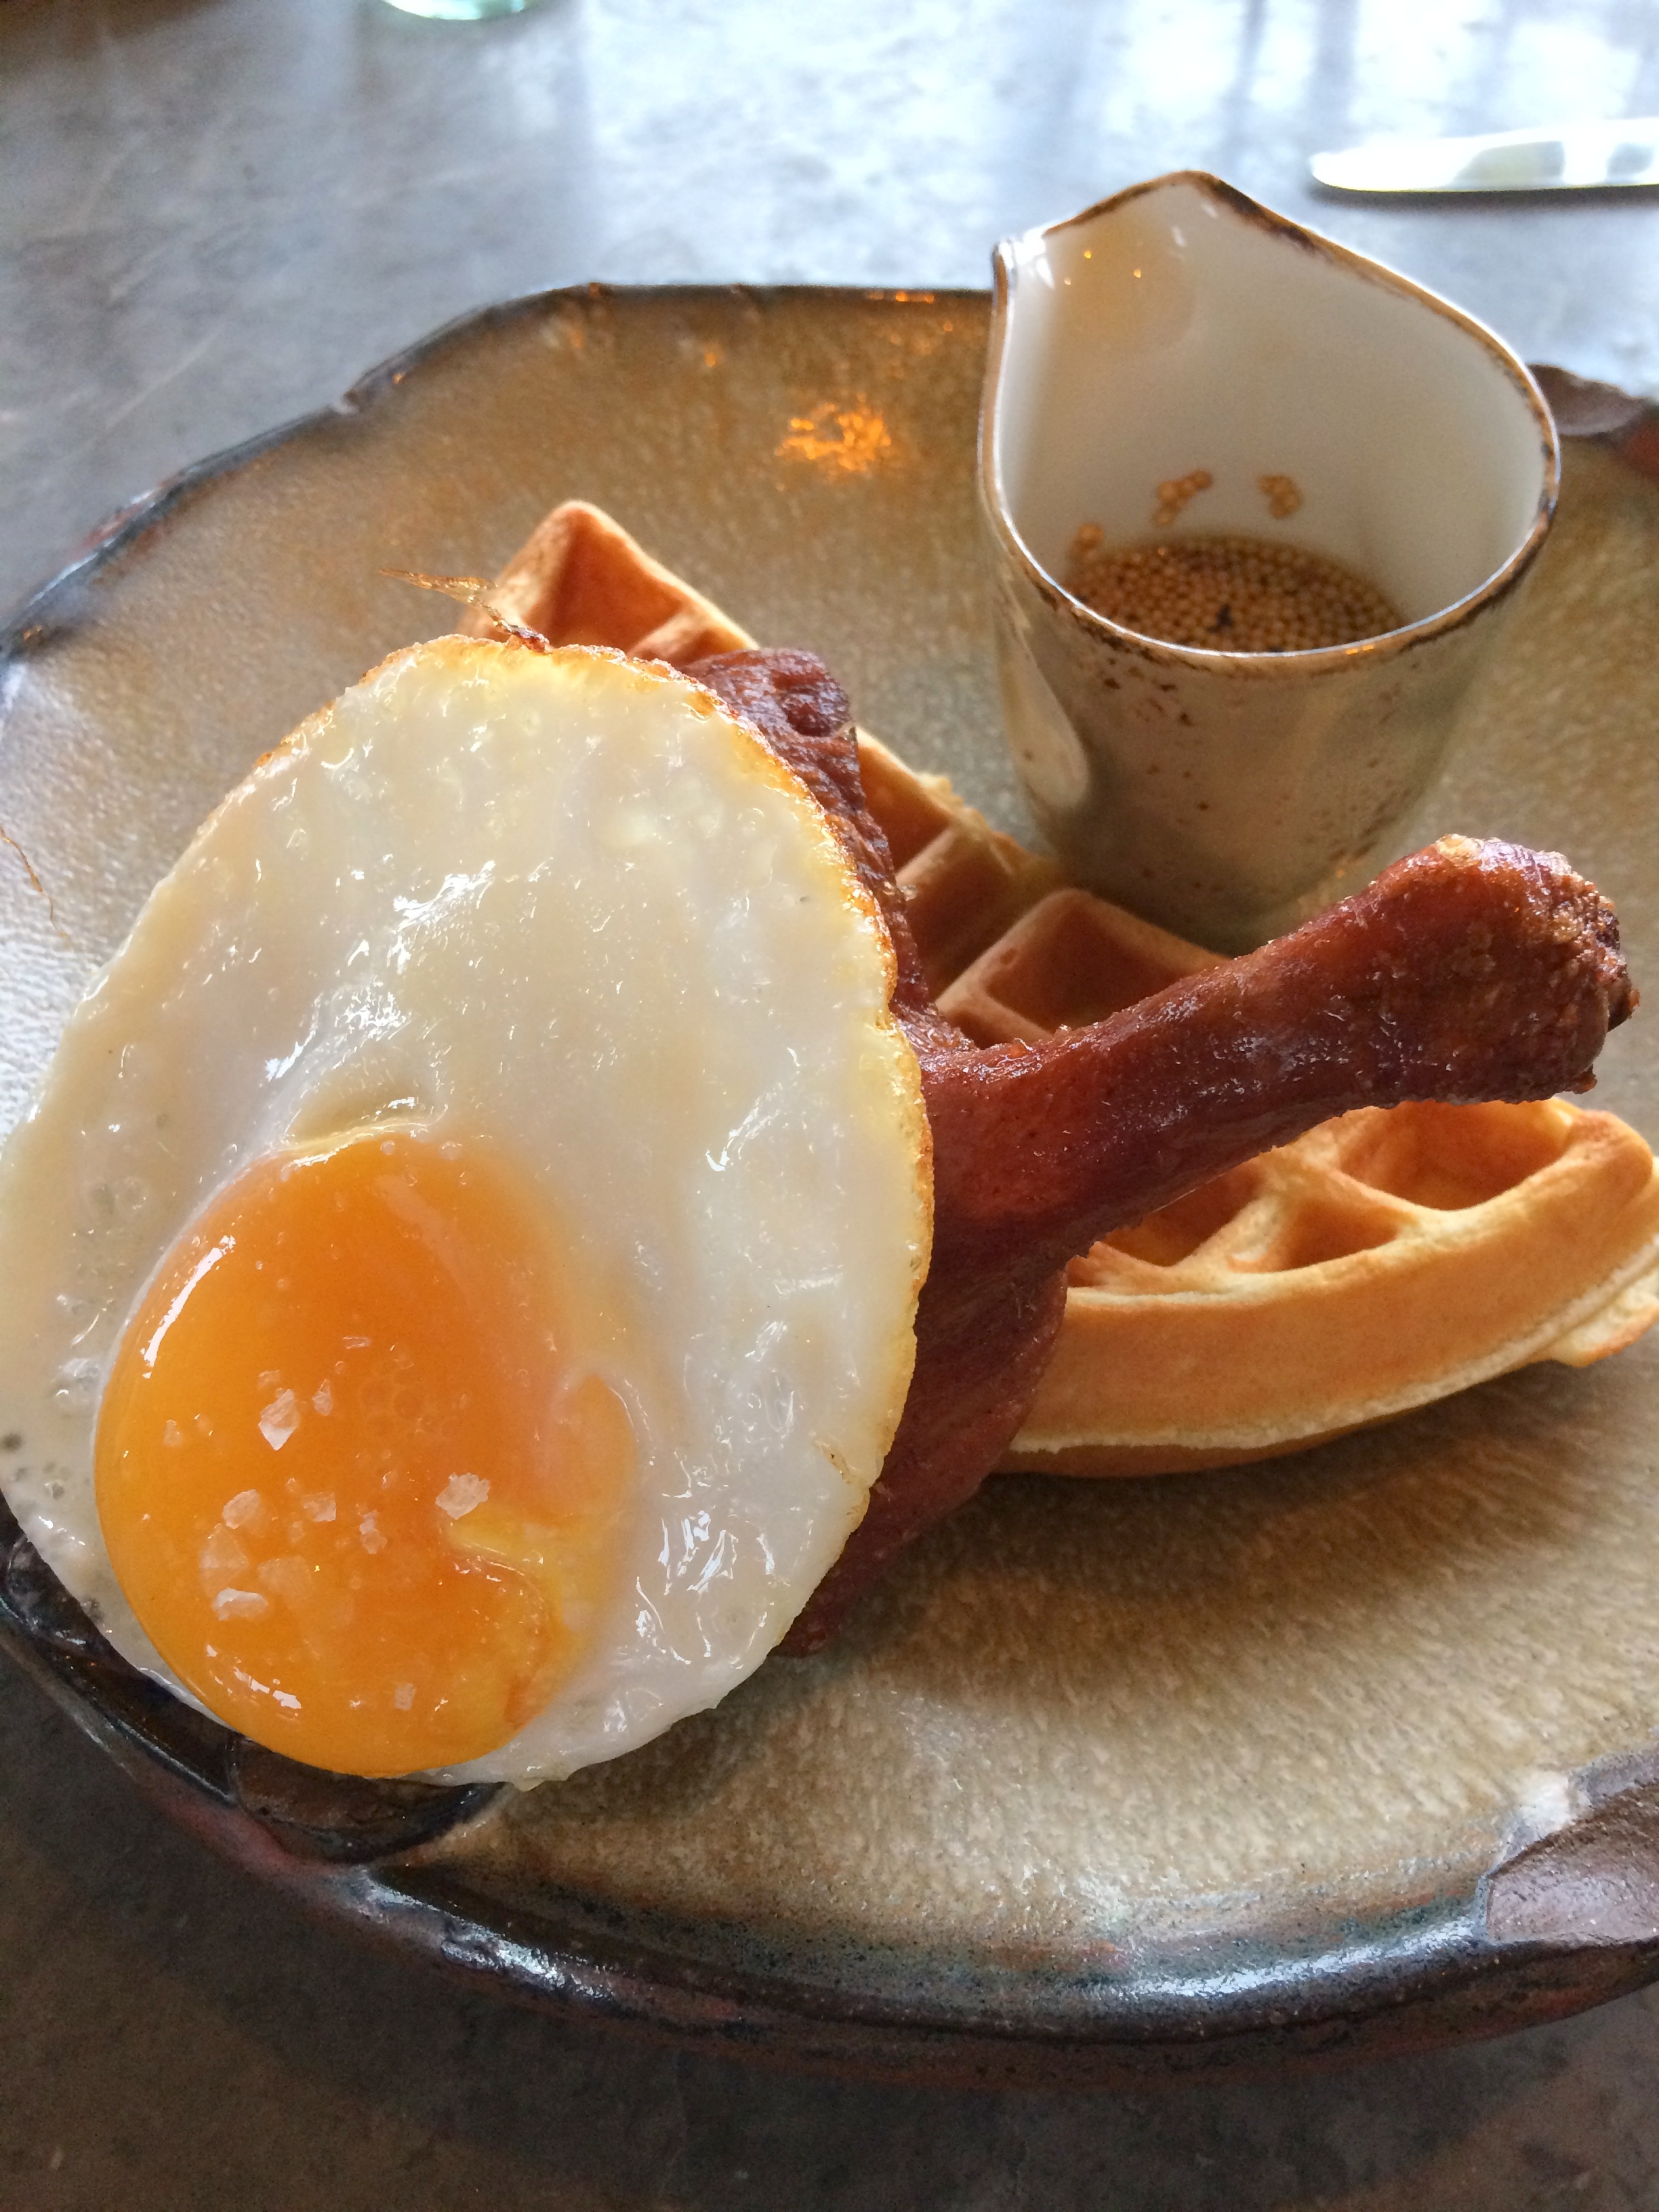 duck and waffle where is it | duck & waffle (or: why would you eat duck with a waffle?)lardy ladies